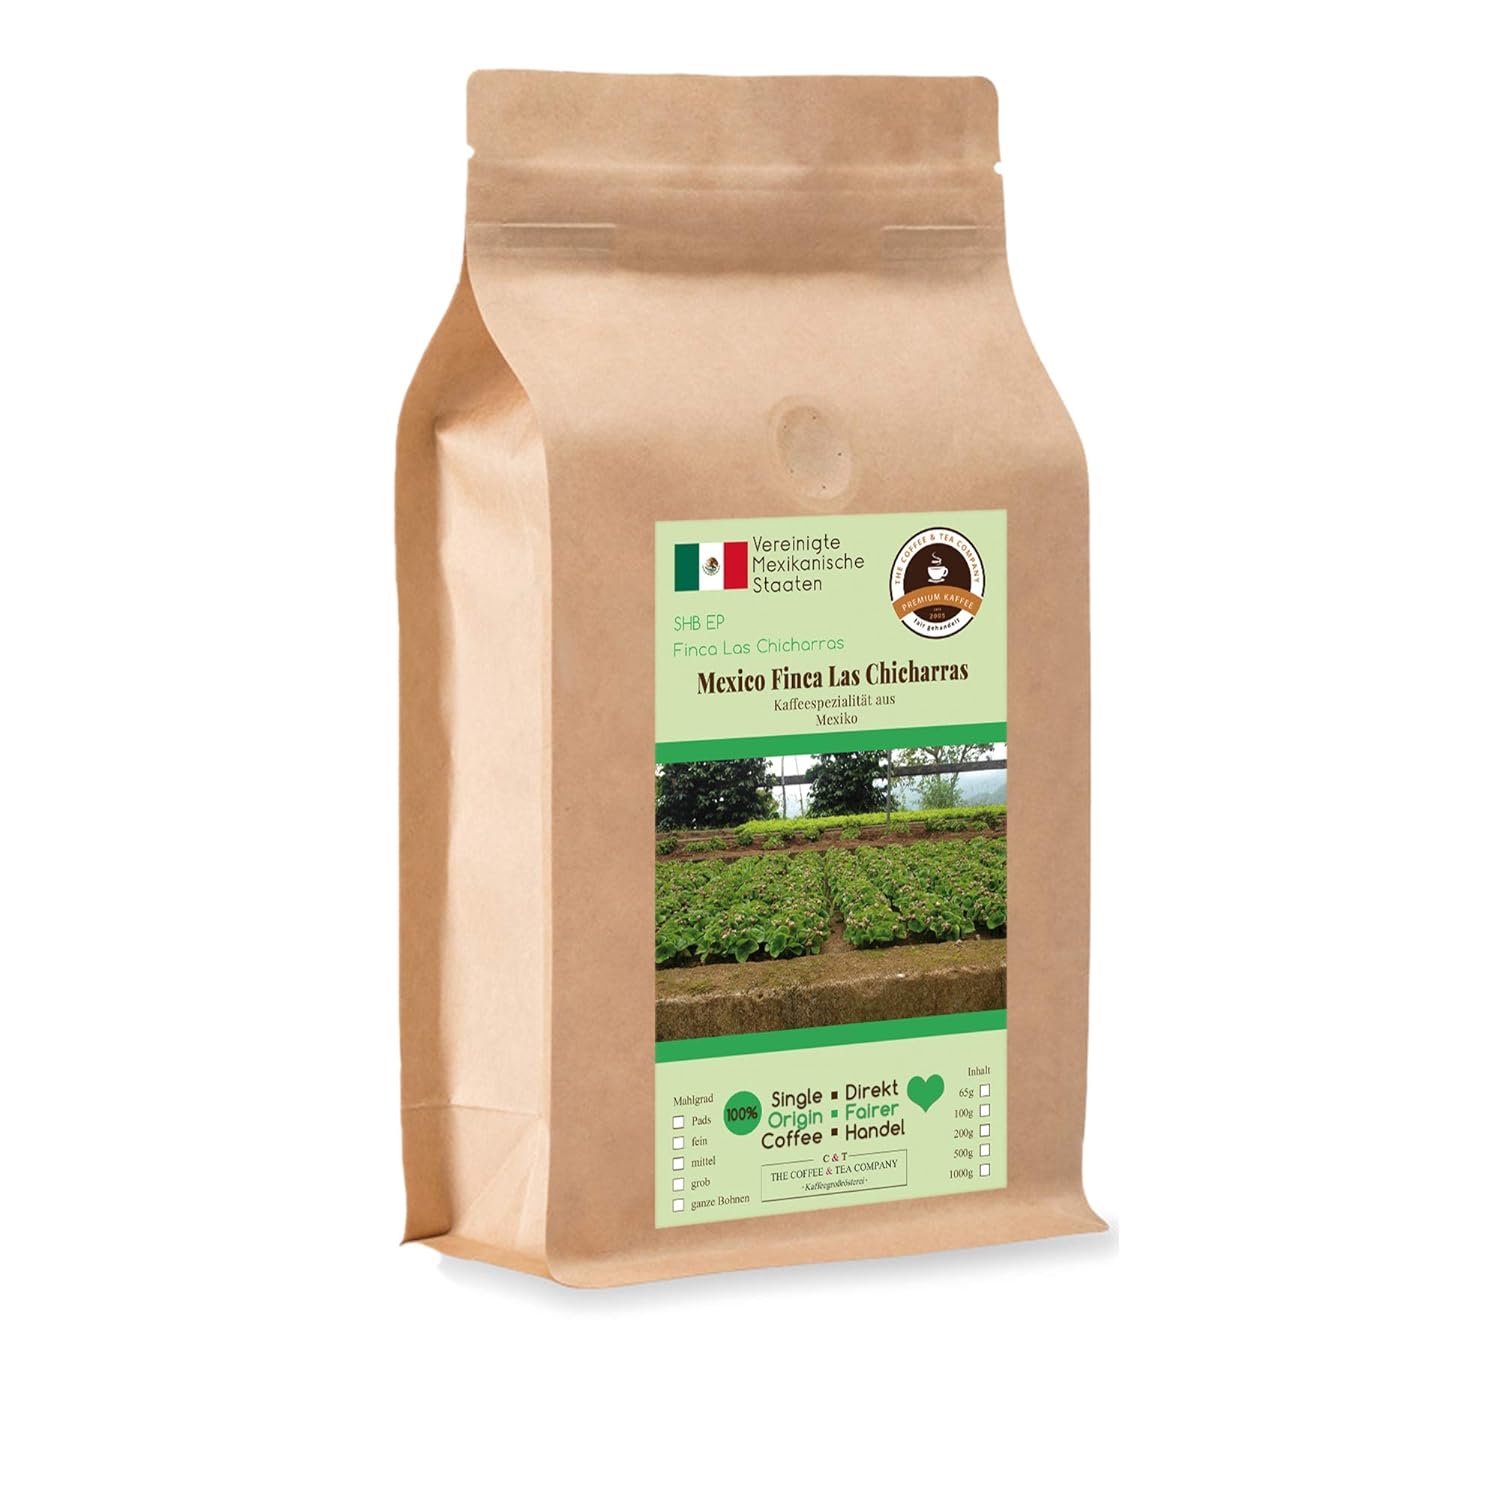 Coffee Globetrotter - Coffee with Heart - Mexico Finca Las Chicharras - 500 g Finely Ground - for Espresso Maker, Espresso Machine - Top Coffee Fair Trade Supports Social Projects